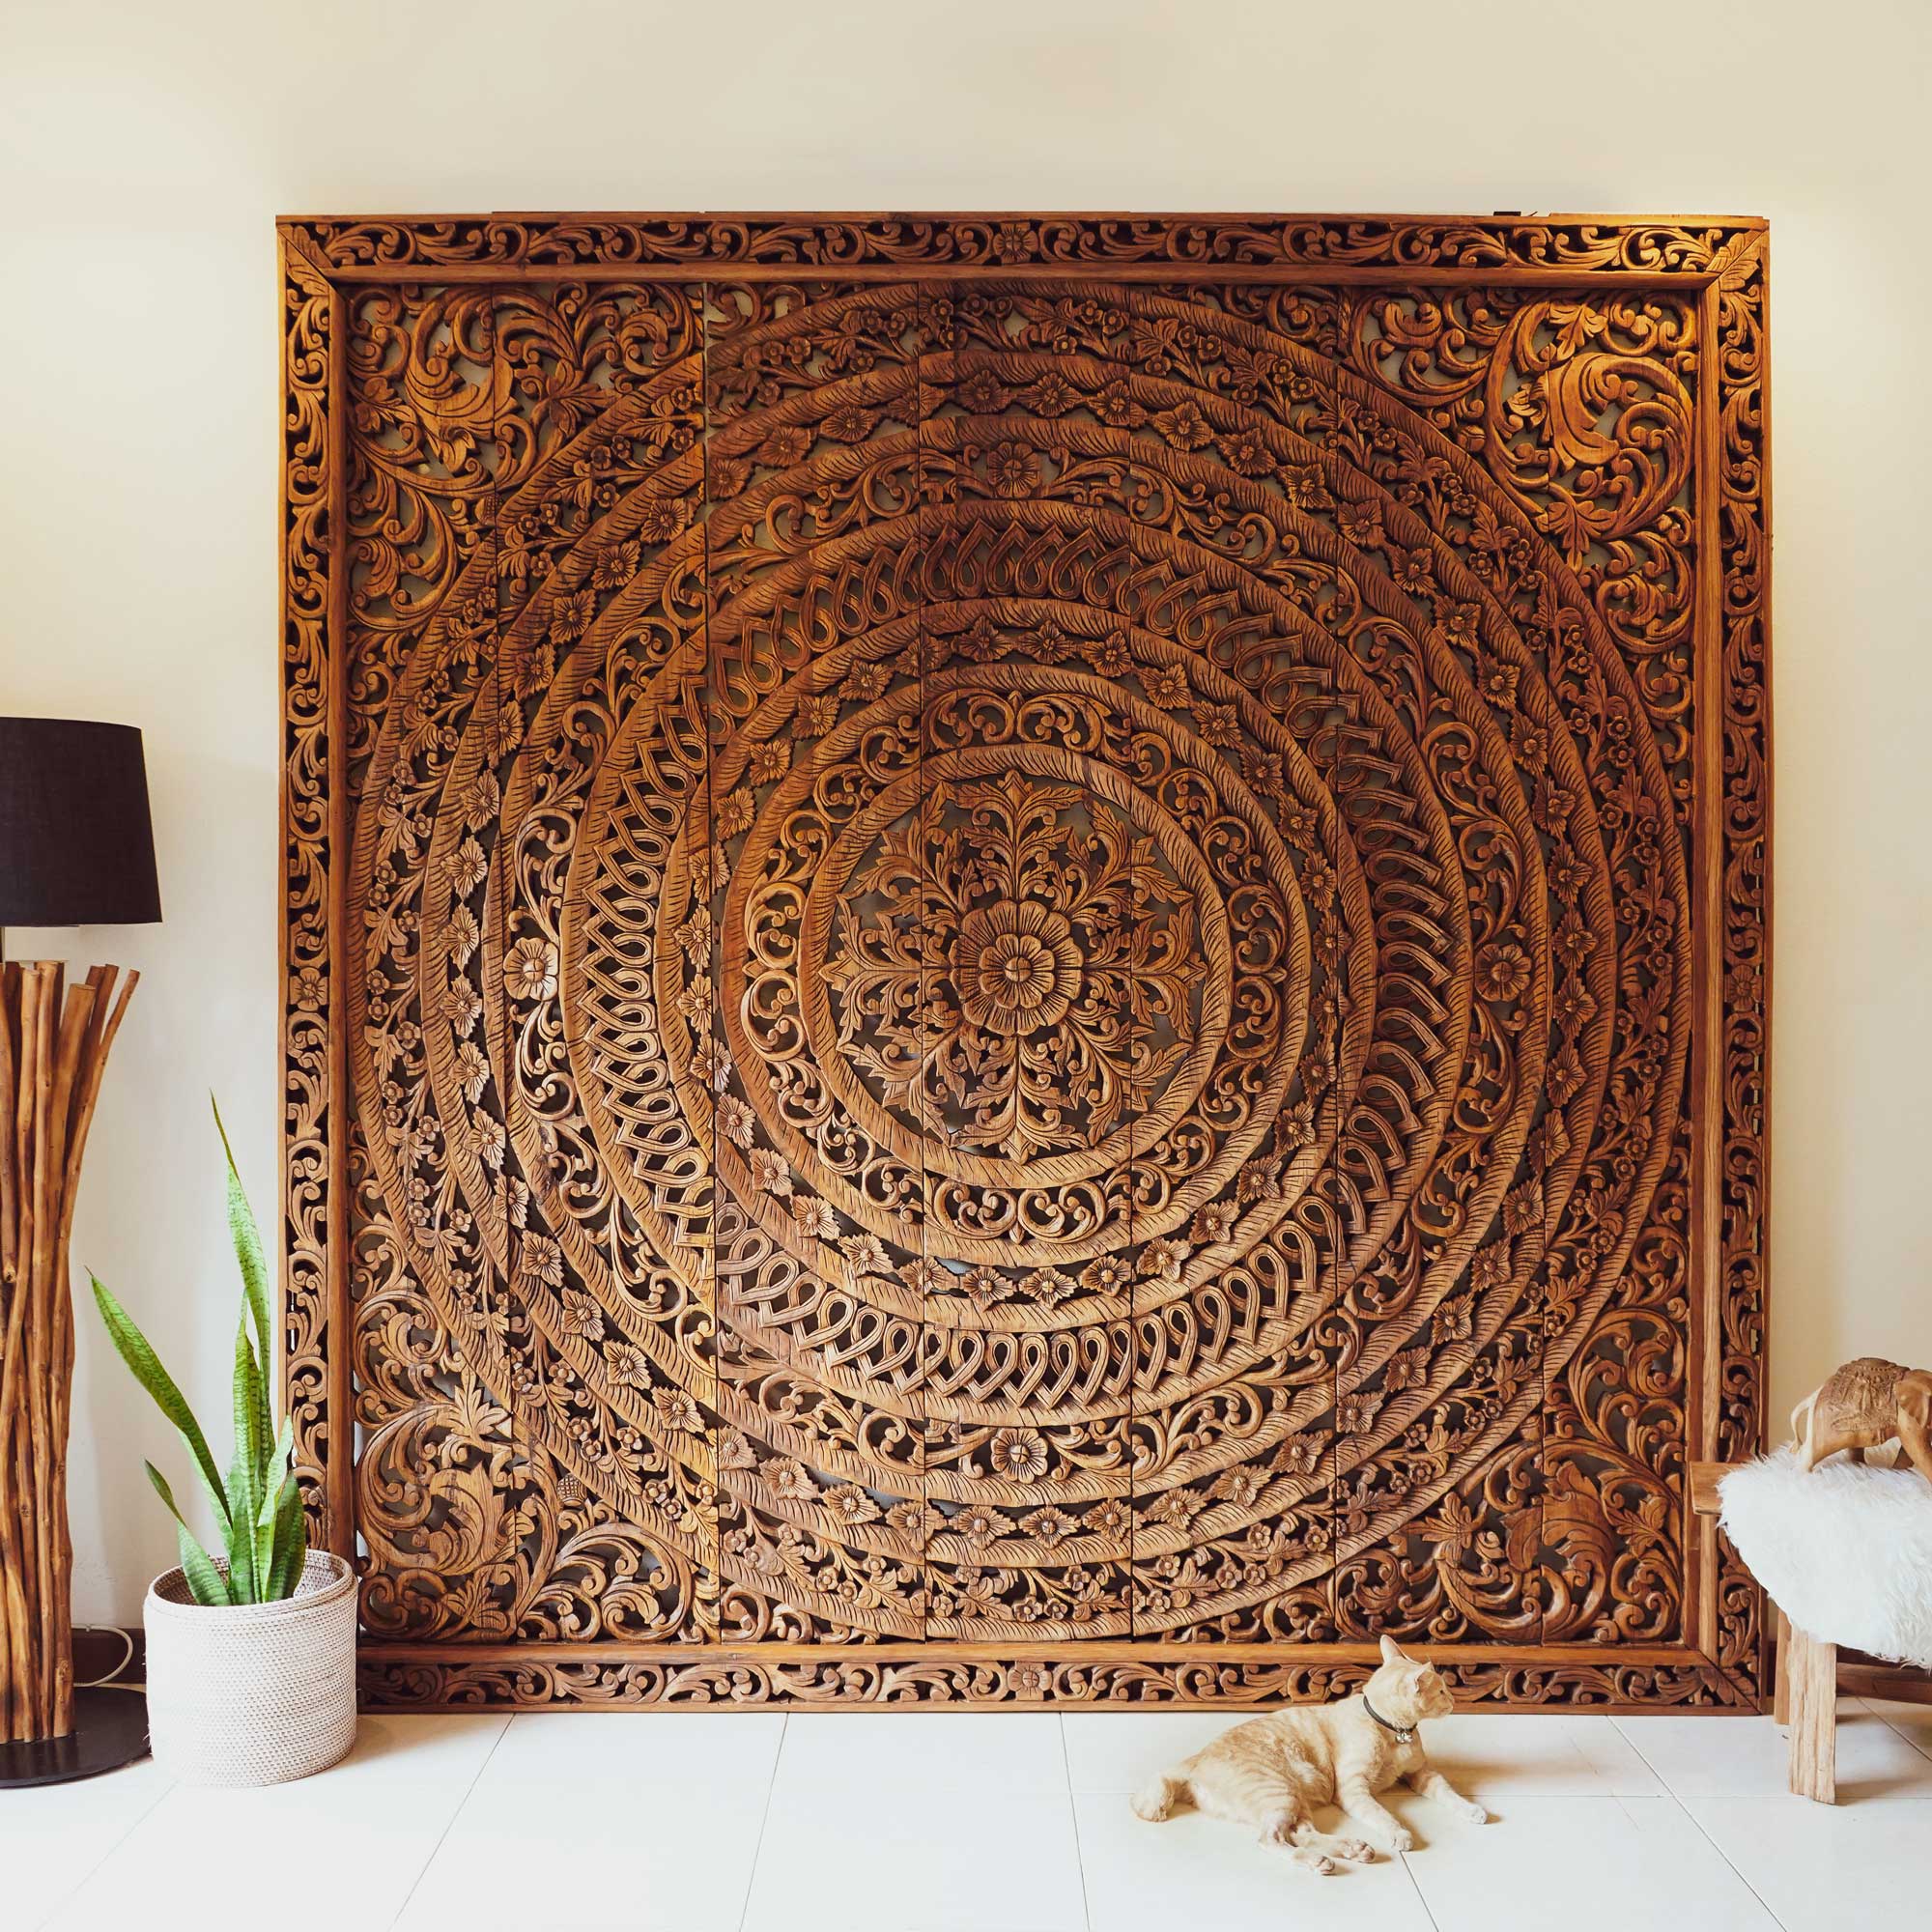 https://www.siamsawadee.com/wp-content/uploads/2016/09/Large-Handmade-Relief-Carving-Reclaim-Teak-Wood-Wall-Panel-With-Frame-From-Thailand-Asian-Tropical-Home-Decor-92-inches.jpg